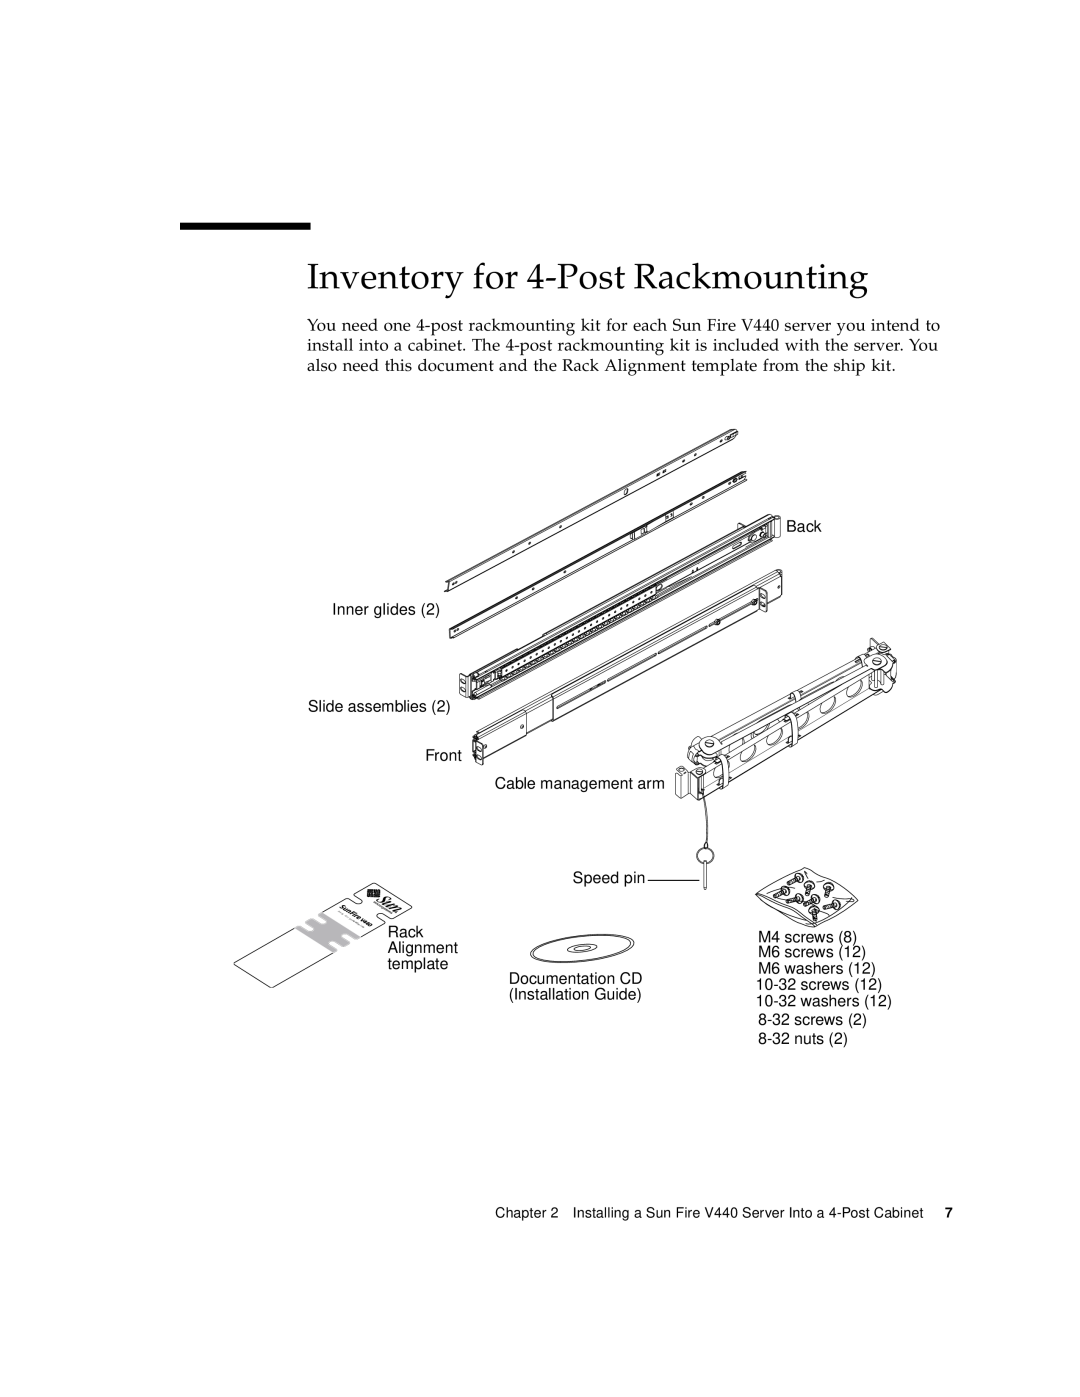 Sun Microsystems 816-7727-10 manual Inventory for 4-Post Rackmounting 